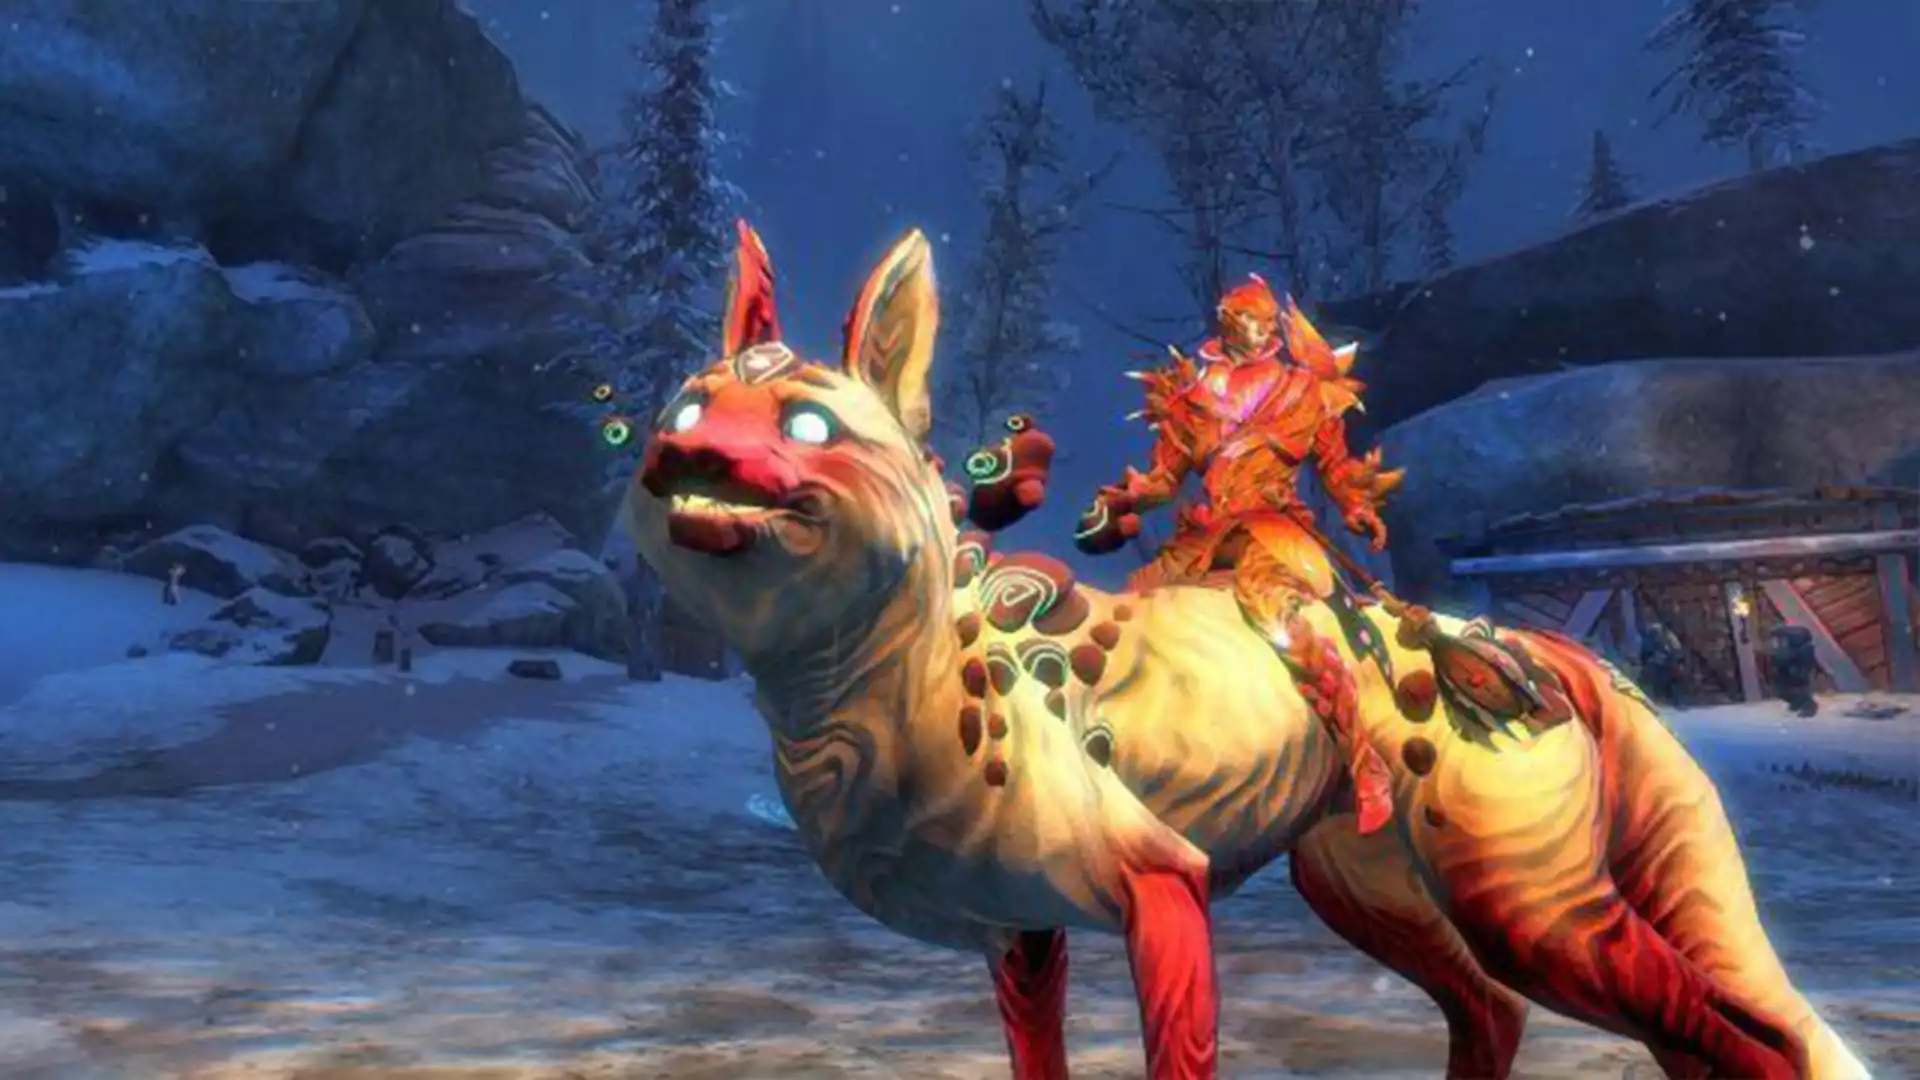 Guild Wars 2 Developers give away great mounts